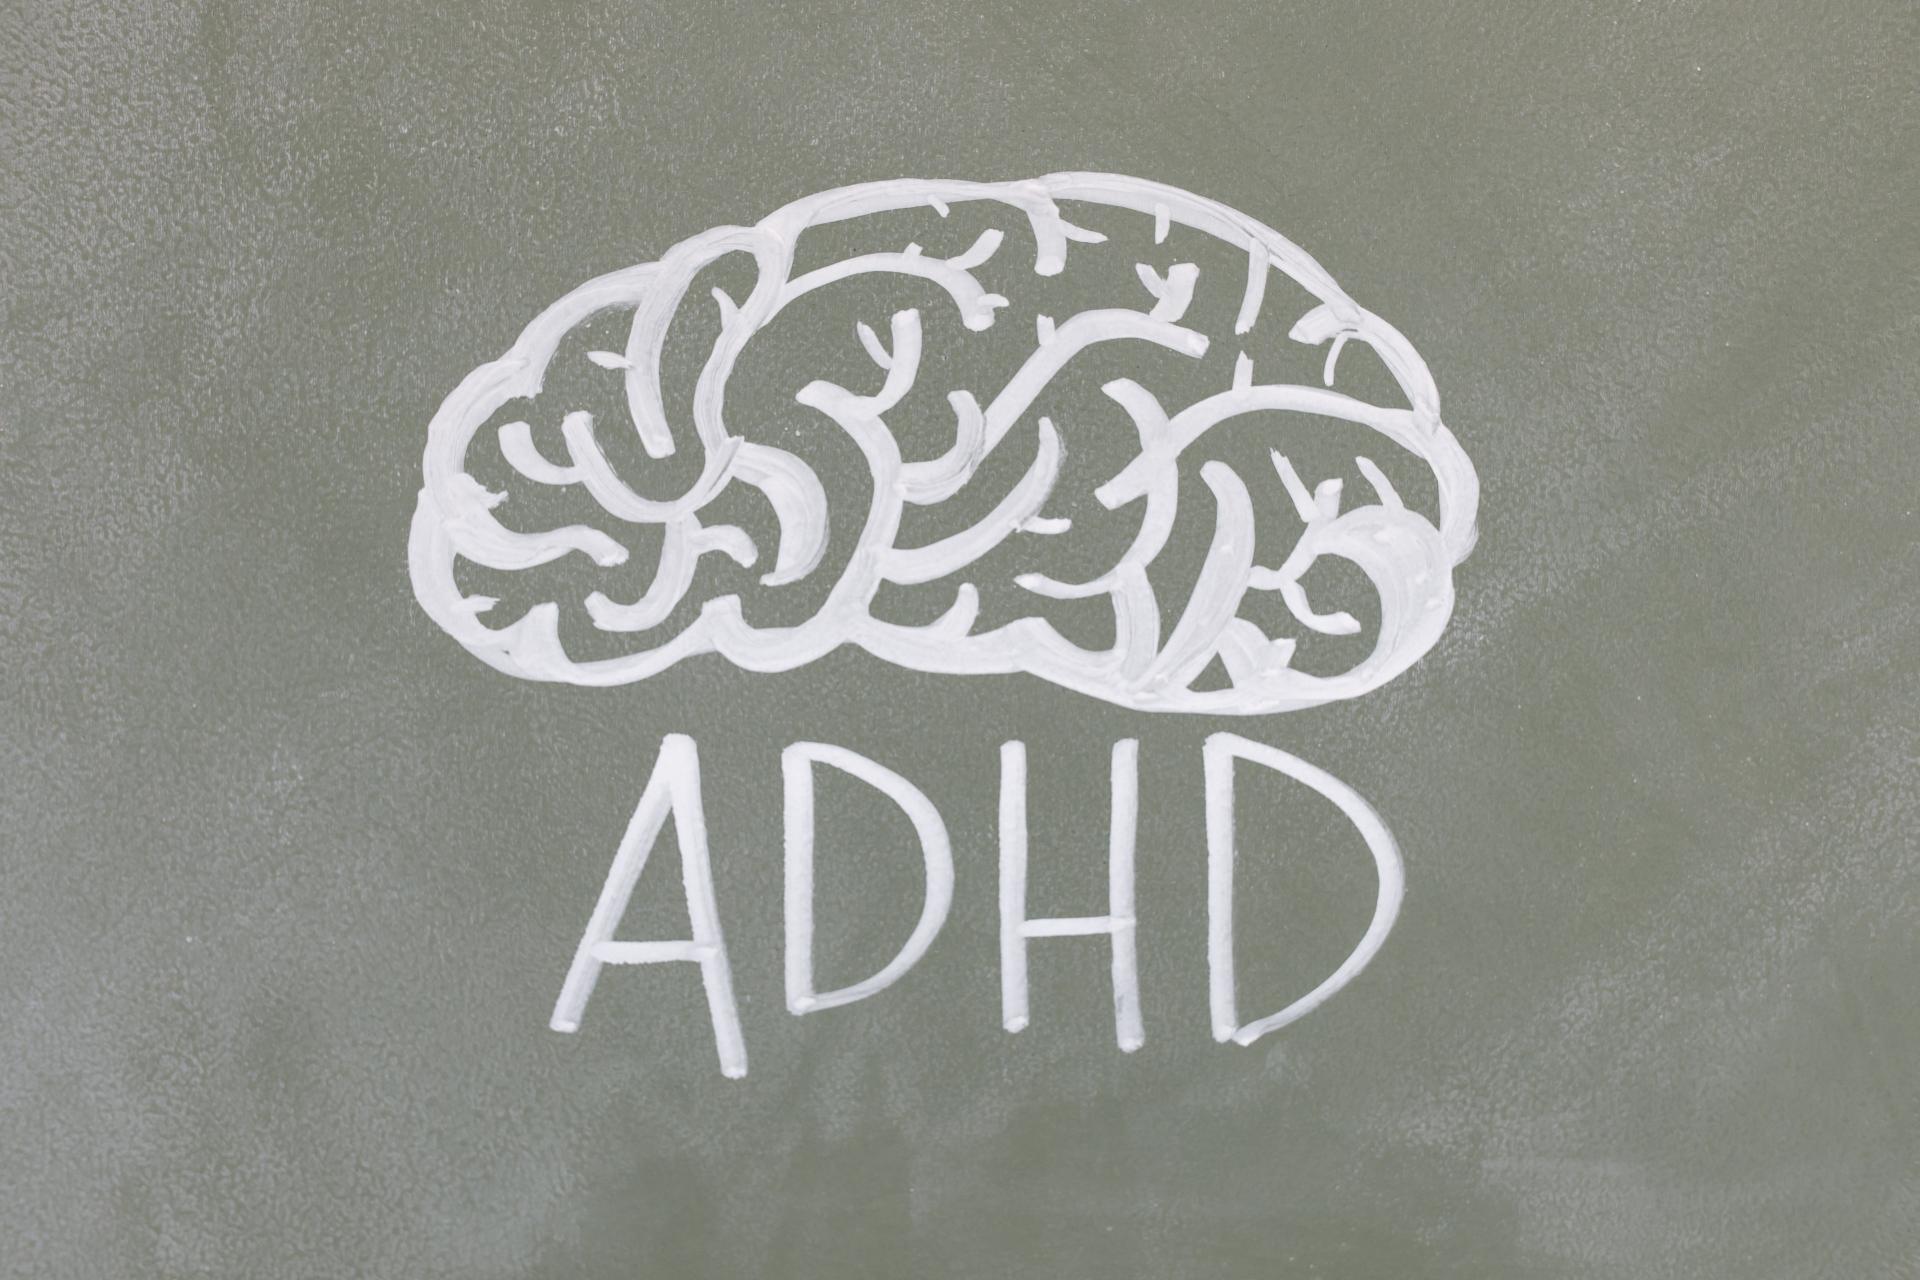 ADHD = More Than the Eye Can See